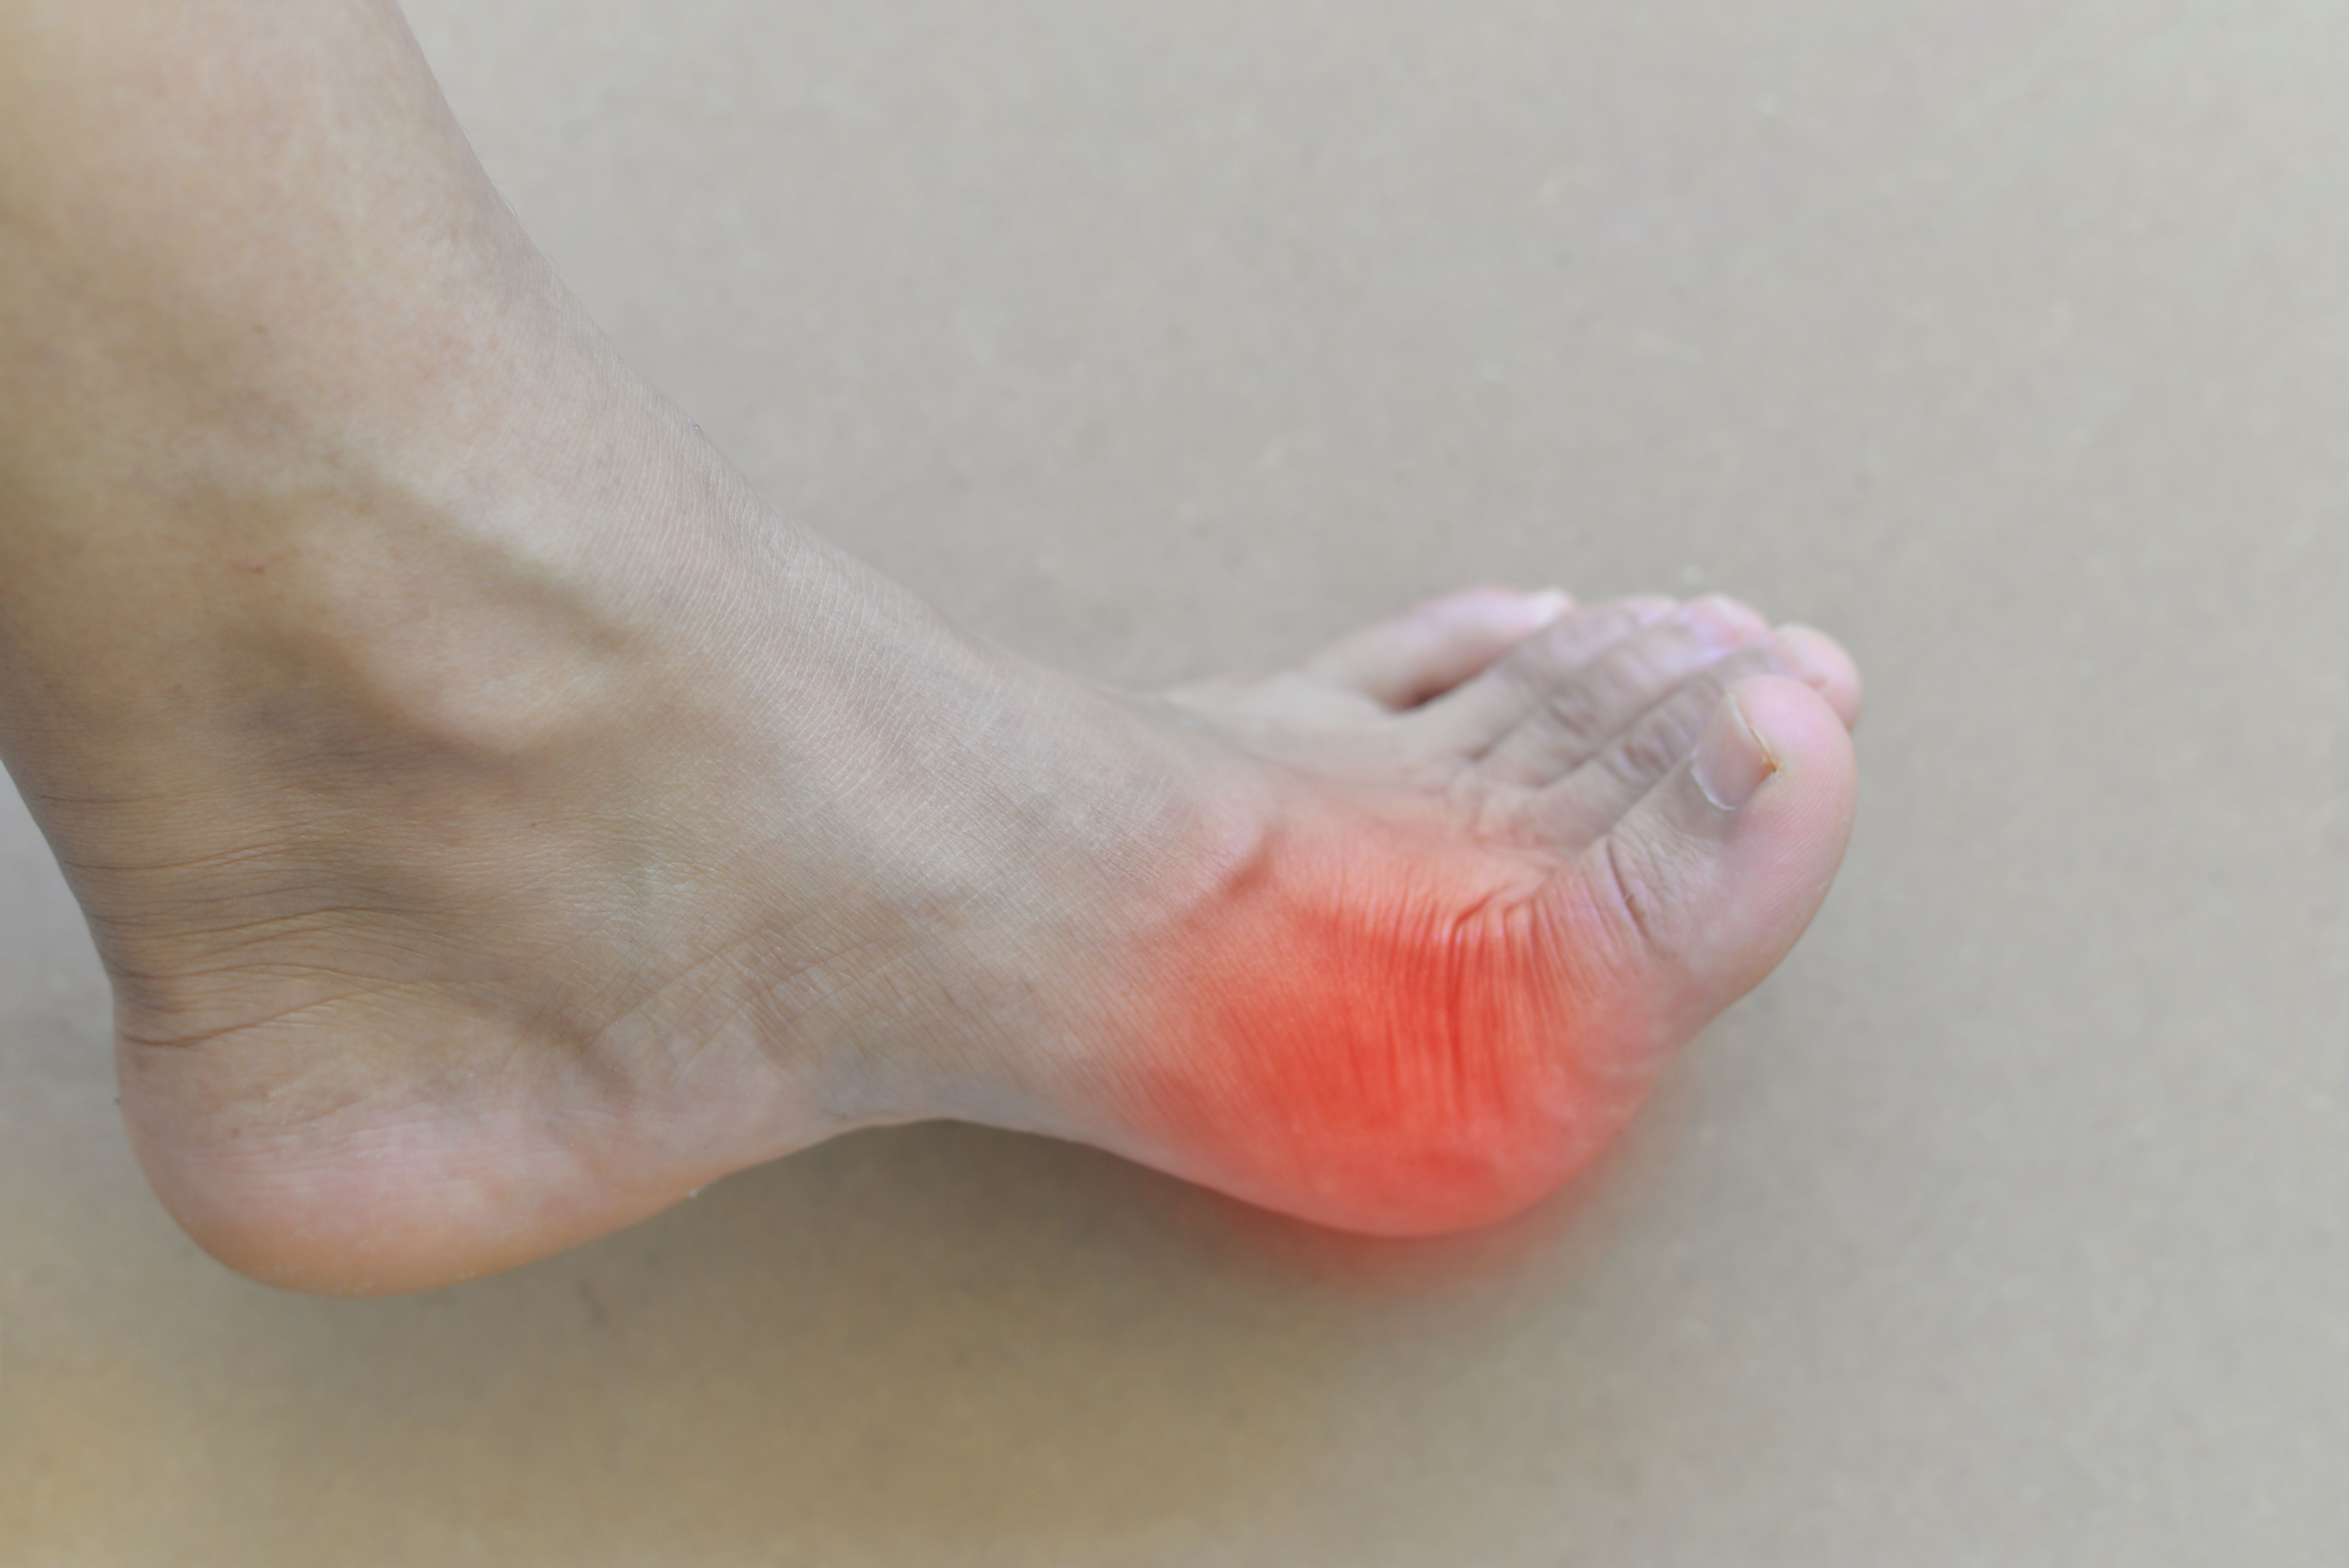 Early Gout Onset, Tophaceous Disease in Men Linked to Risk Alleles 